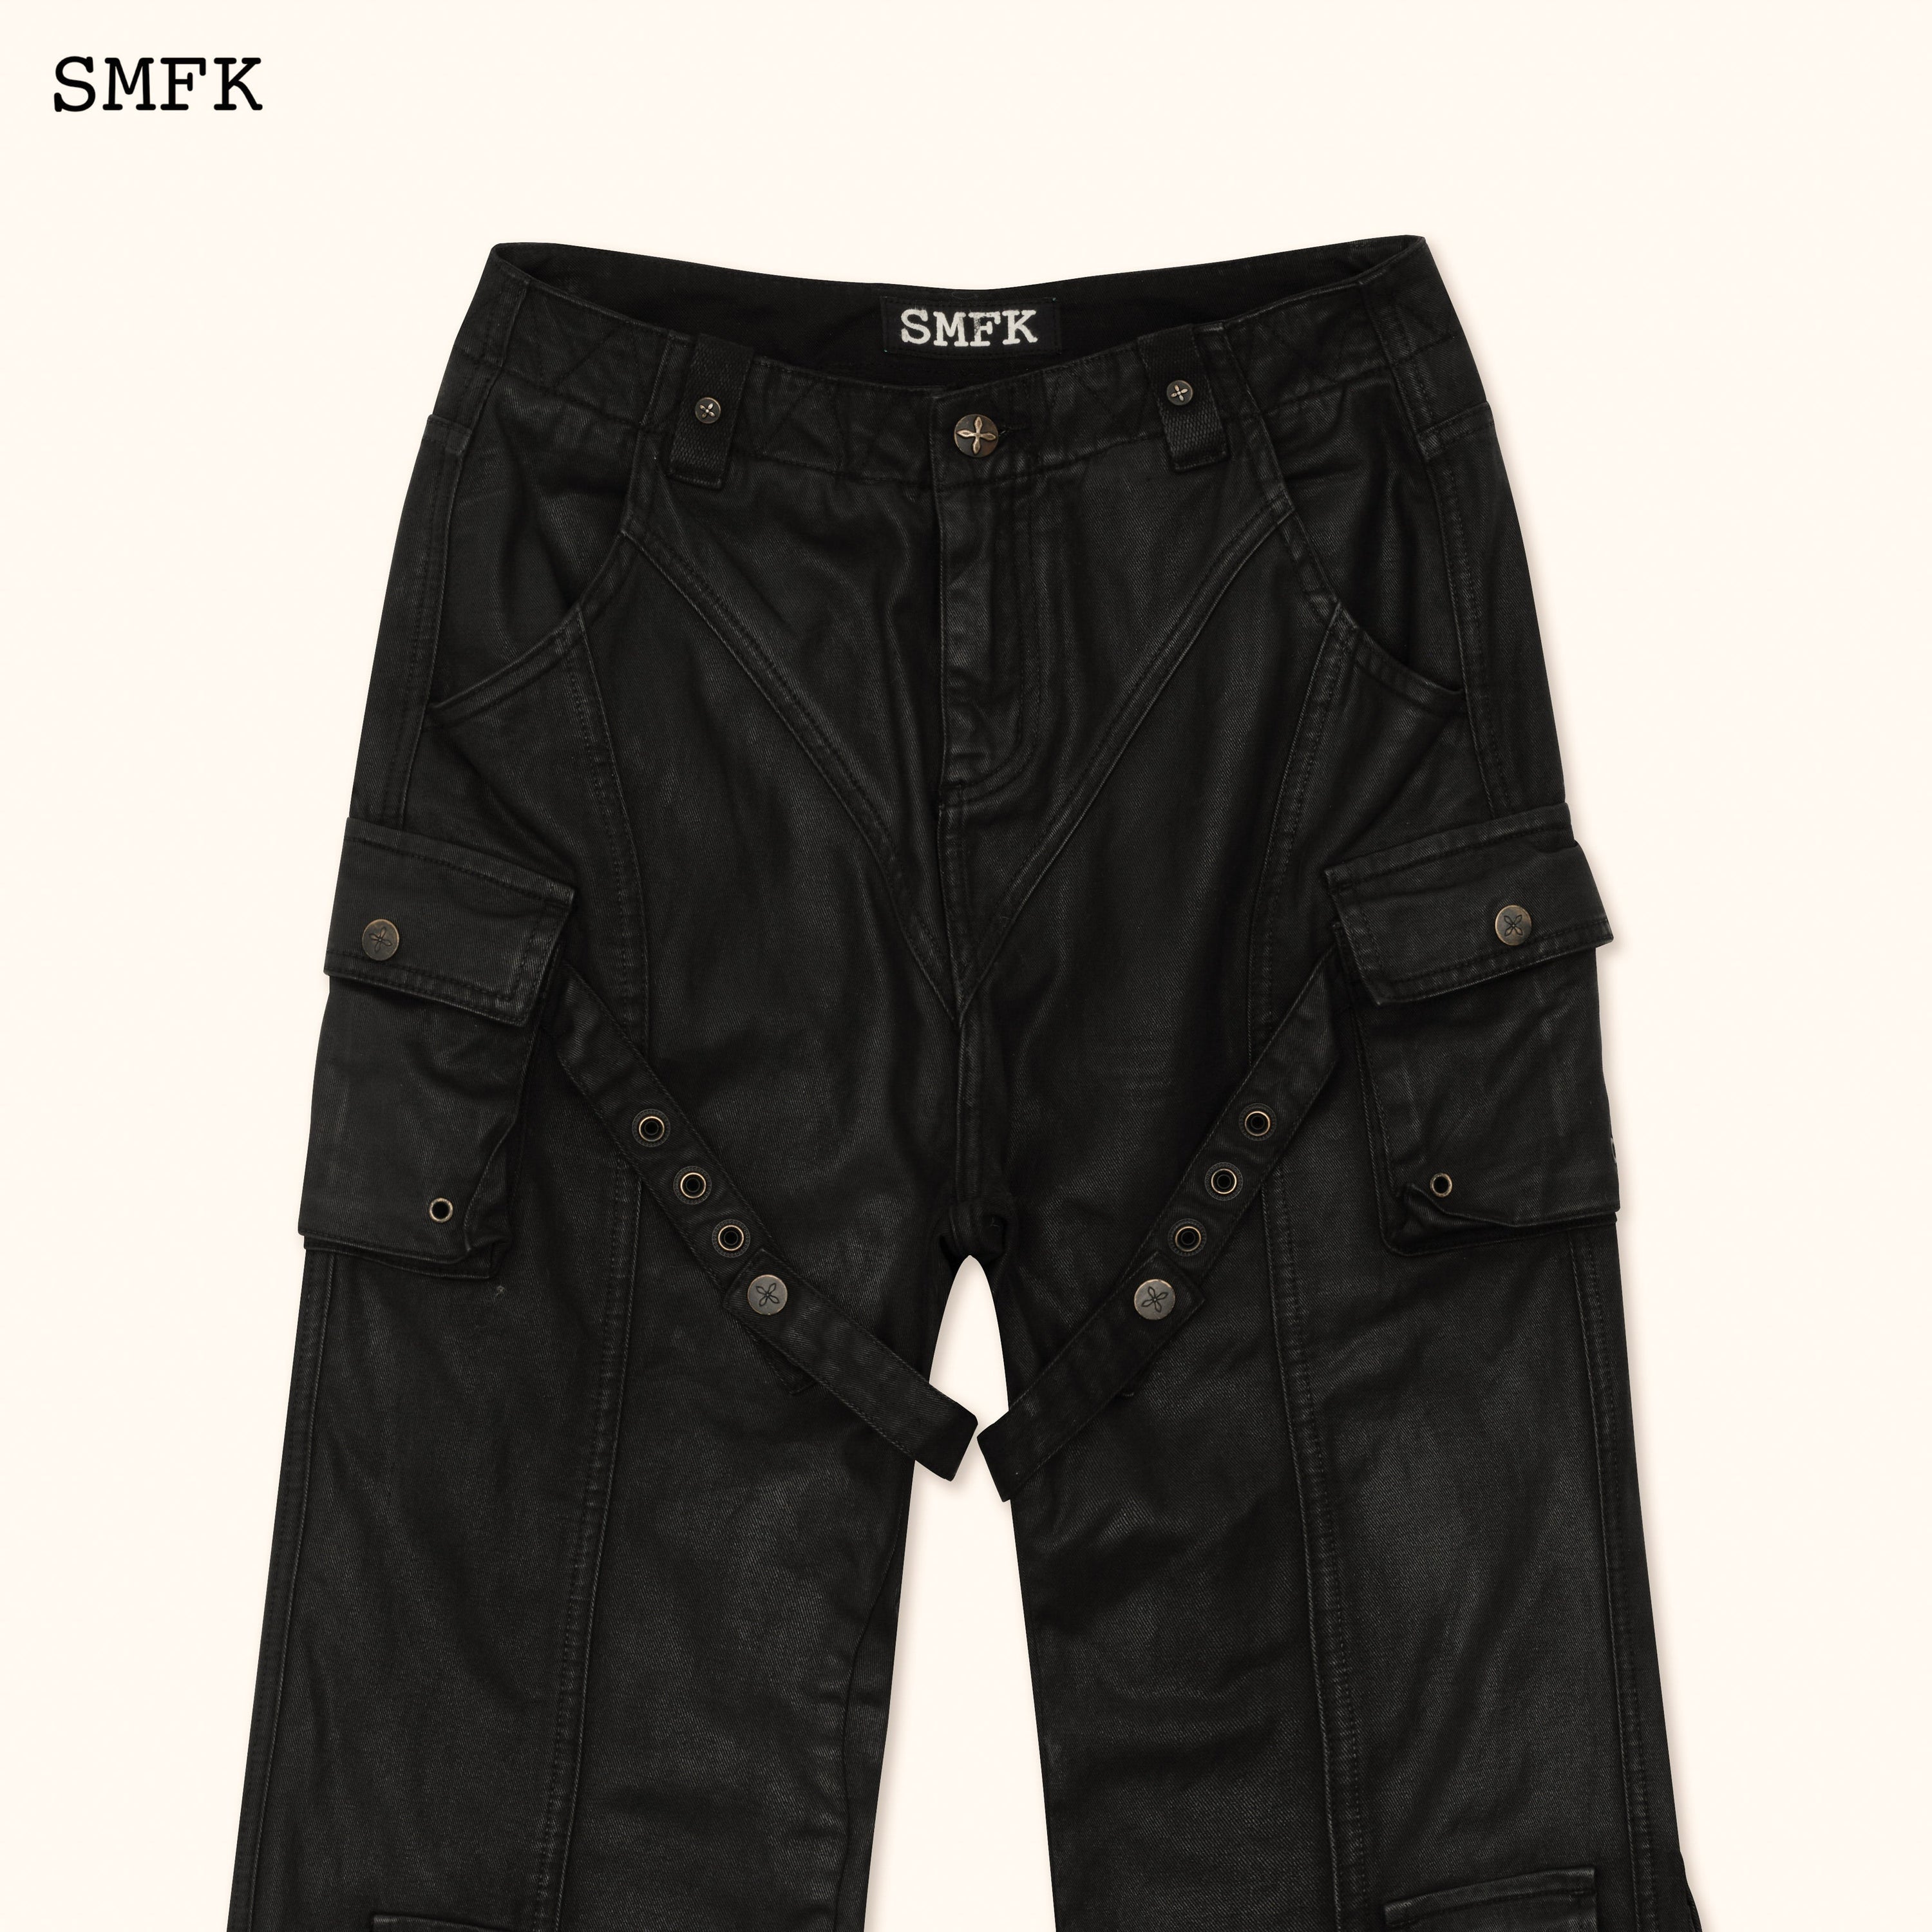 Ancient Myth Black Panther Waxed Flared Pants - SMFK Official